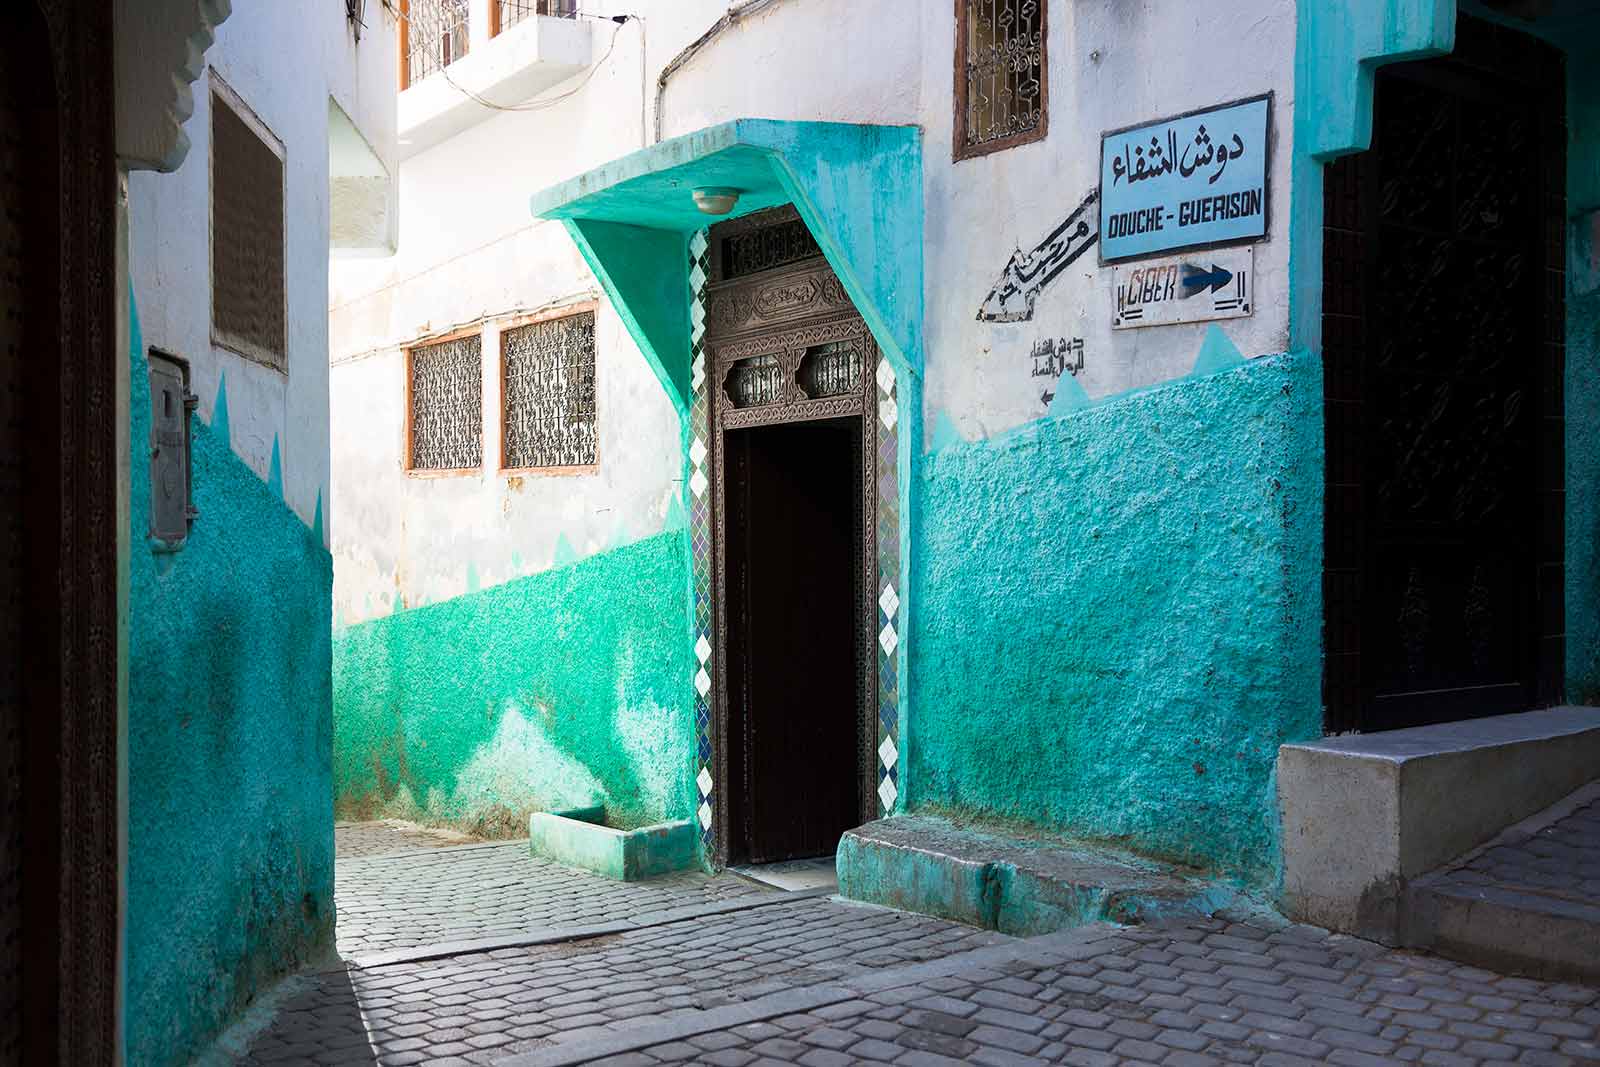 While the streets in the Medinas of Marrakech, Chefchaouen or Fes are invigorating, they can also be exhausting. Moulay Idriss is the perfect spot to get away from the bustling city life, while still being in a city.